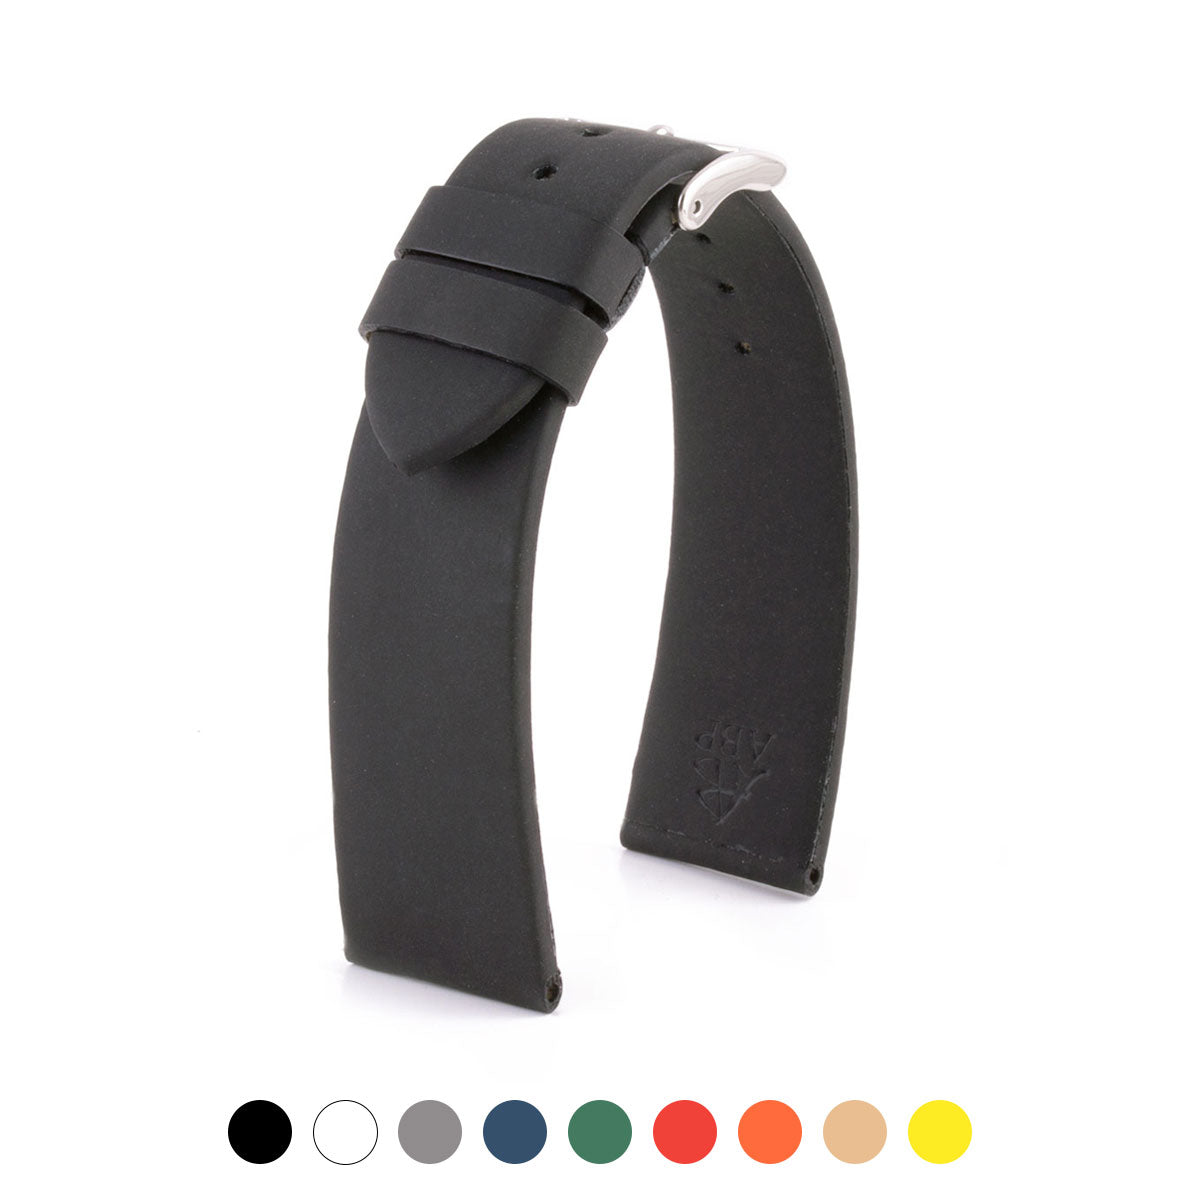 Classic "Essentials" watch band - Rubberized calf leather strap (black, grey, blue, green...)